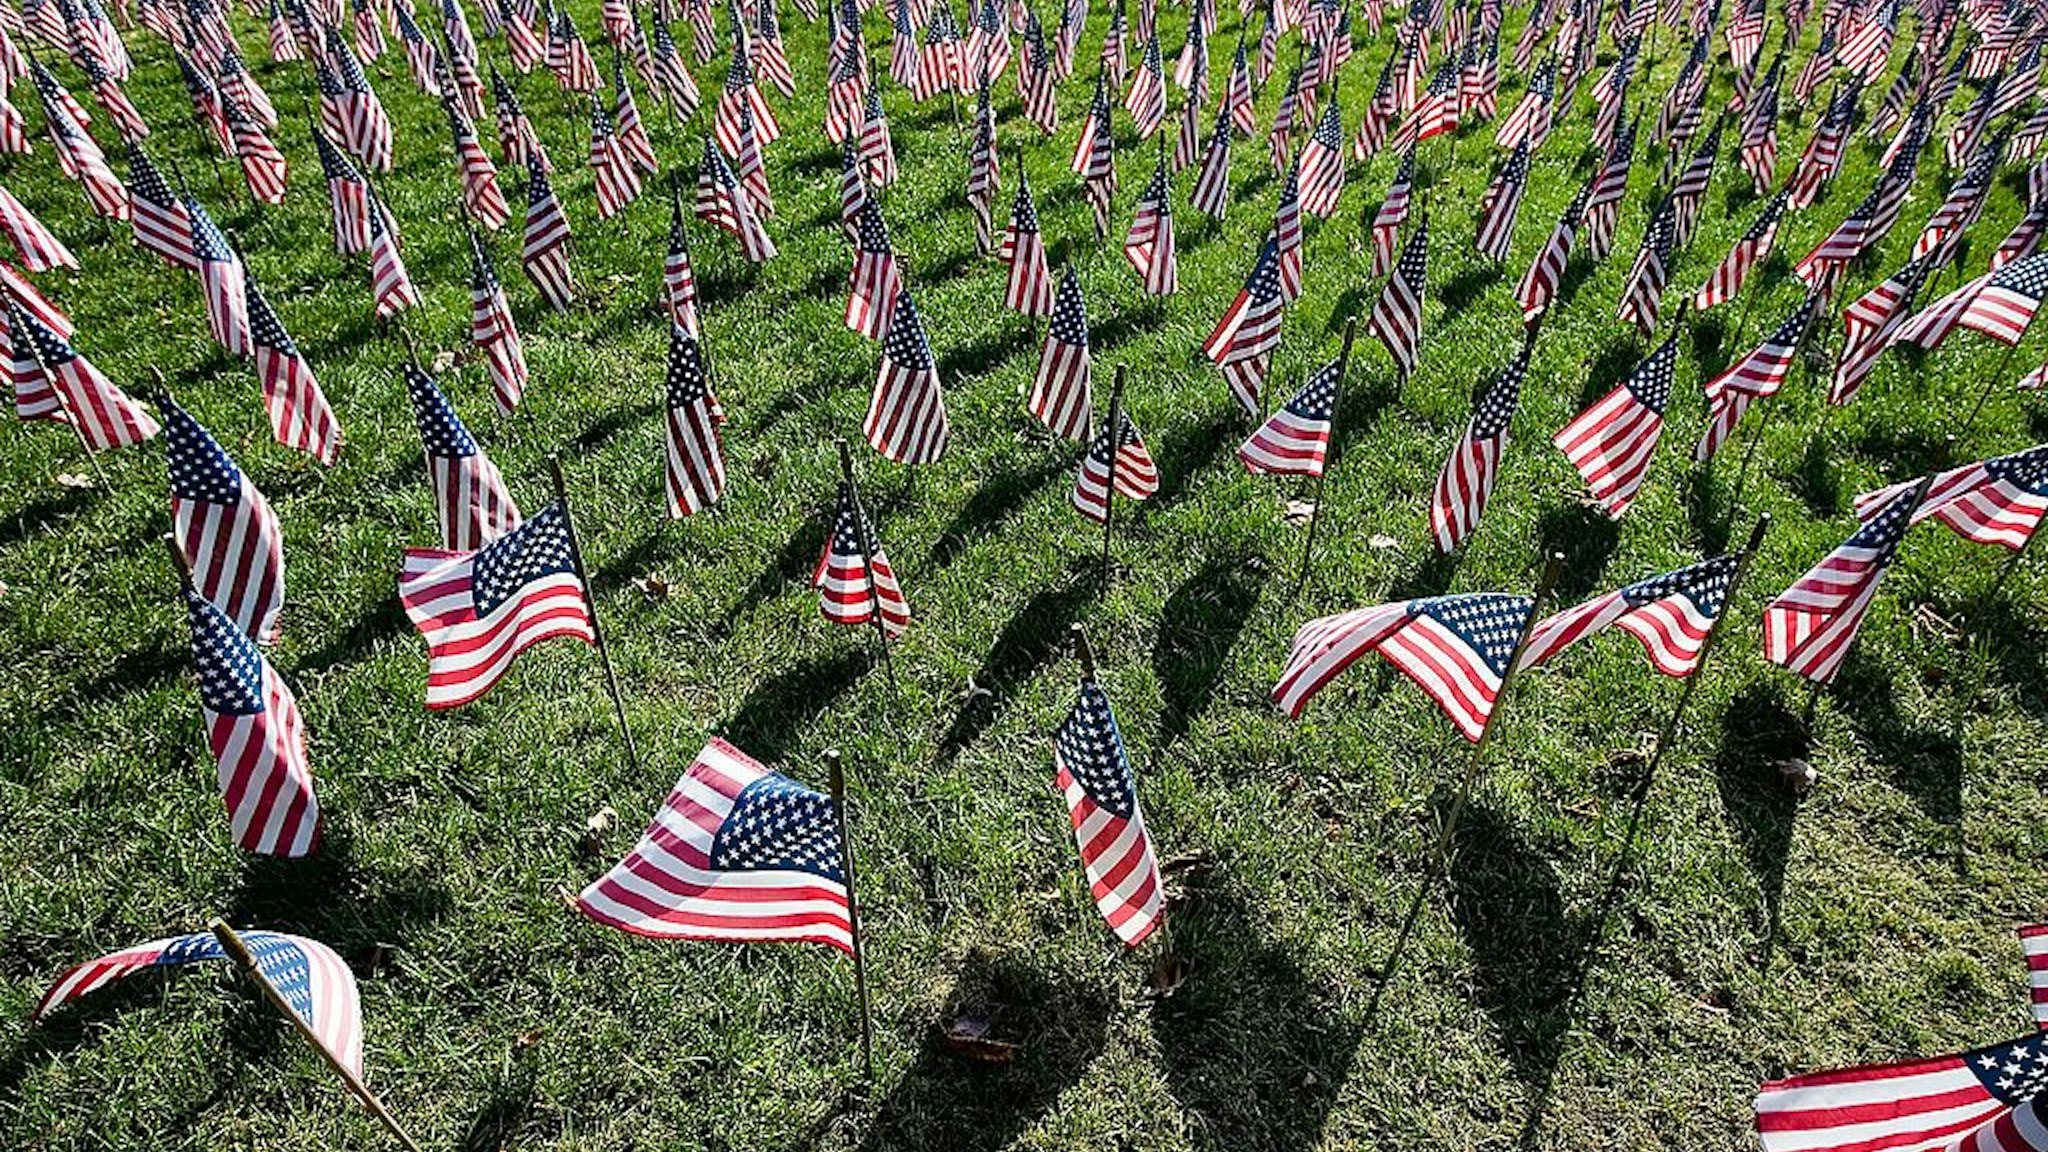 YORK, PA - NOVEMBER 11: Flags line the Iraq War Flag Memorial at the Prospect Hill Cemetery November 11, 2006 in York, Pennsylvania. More than 180 flags were added to the hillside display of 2,669 flags that honor soldiers killed in the war in Iraq.